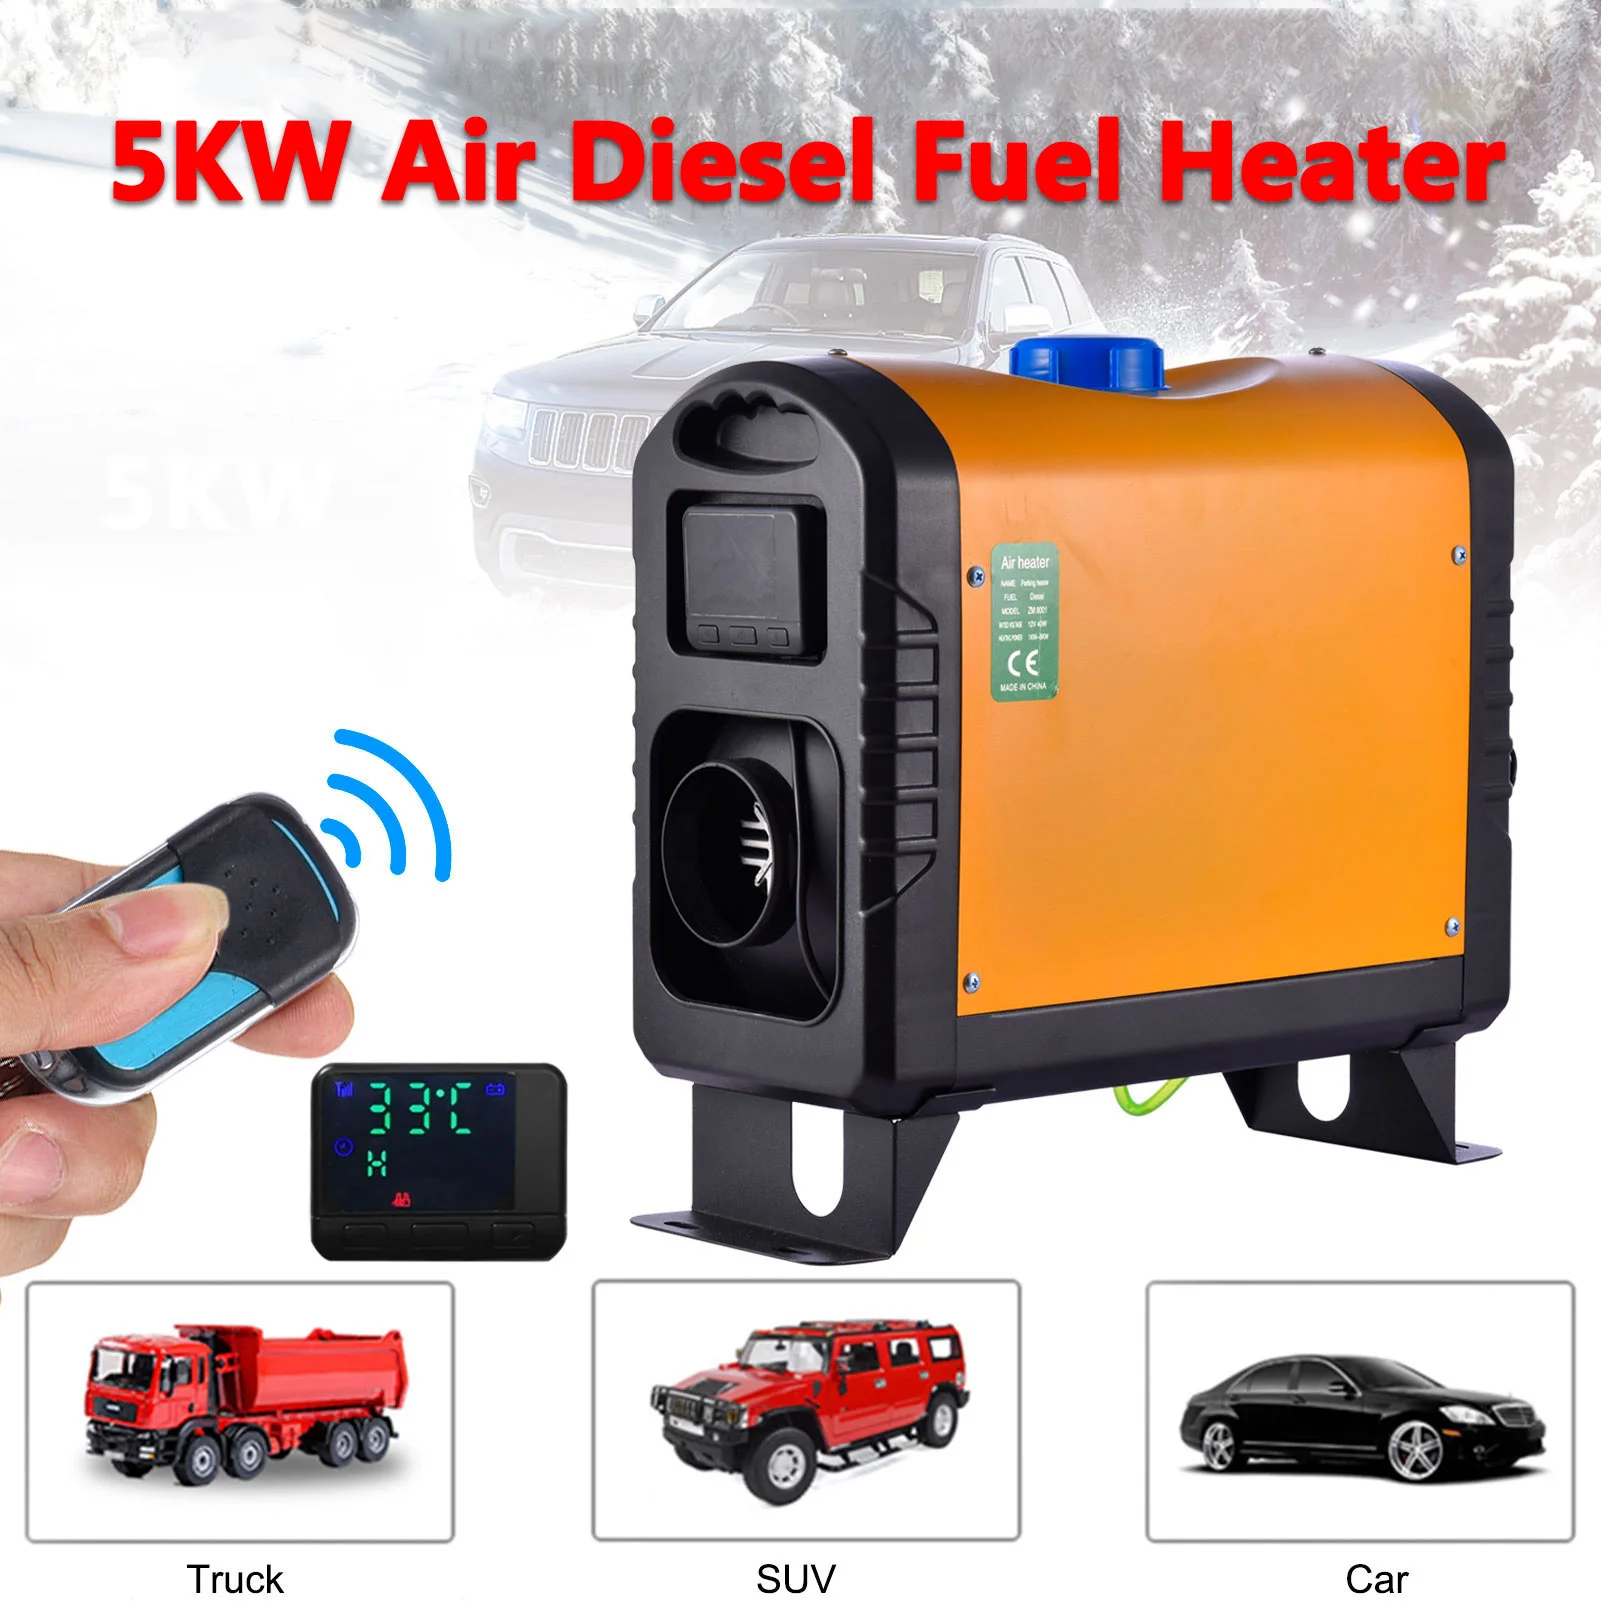 

All In One Air 12V / 24V Diesels Car Parking Heater 5KW Adjustable For Trucks Motor-Homes Boats Bus With LCD Key Switch+Remote